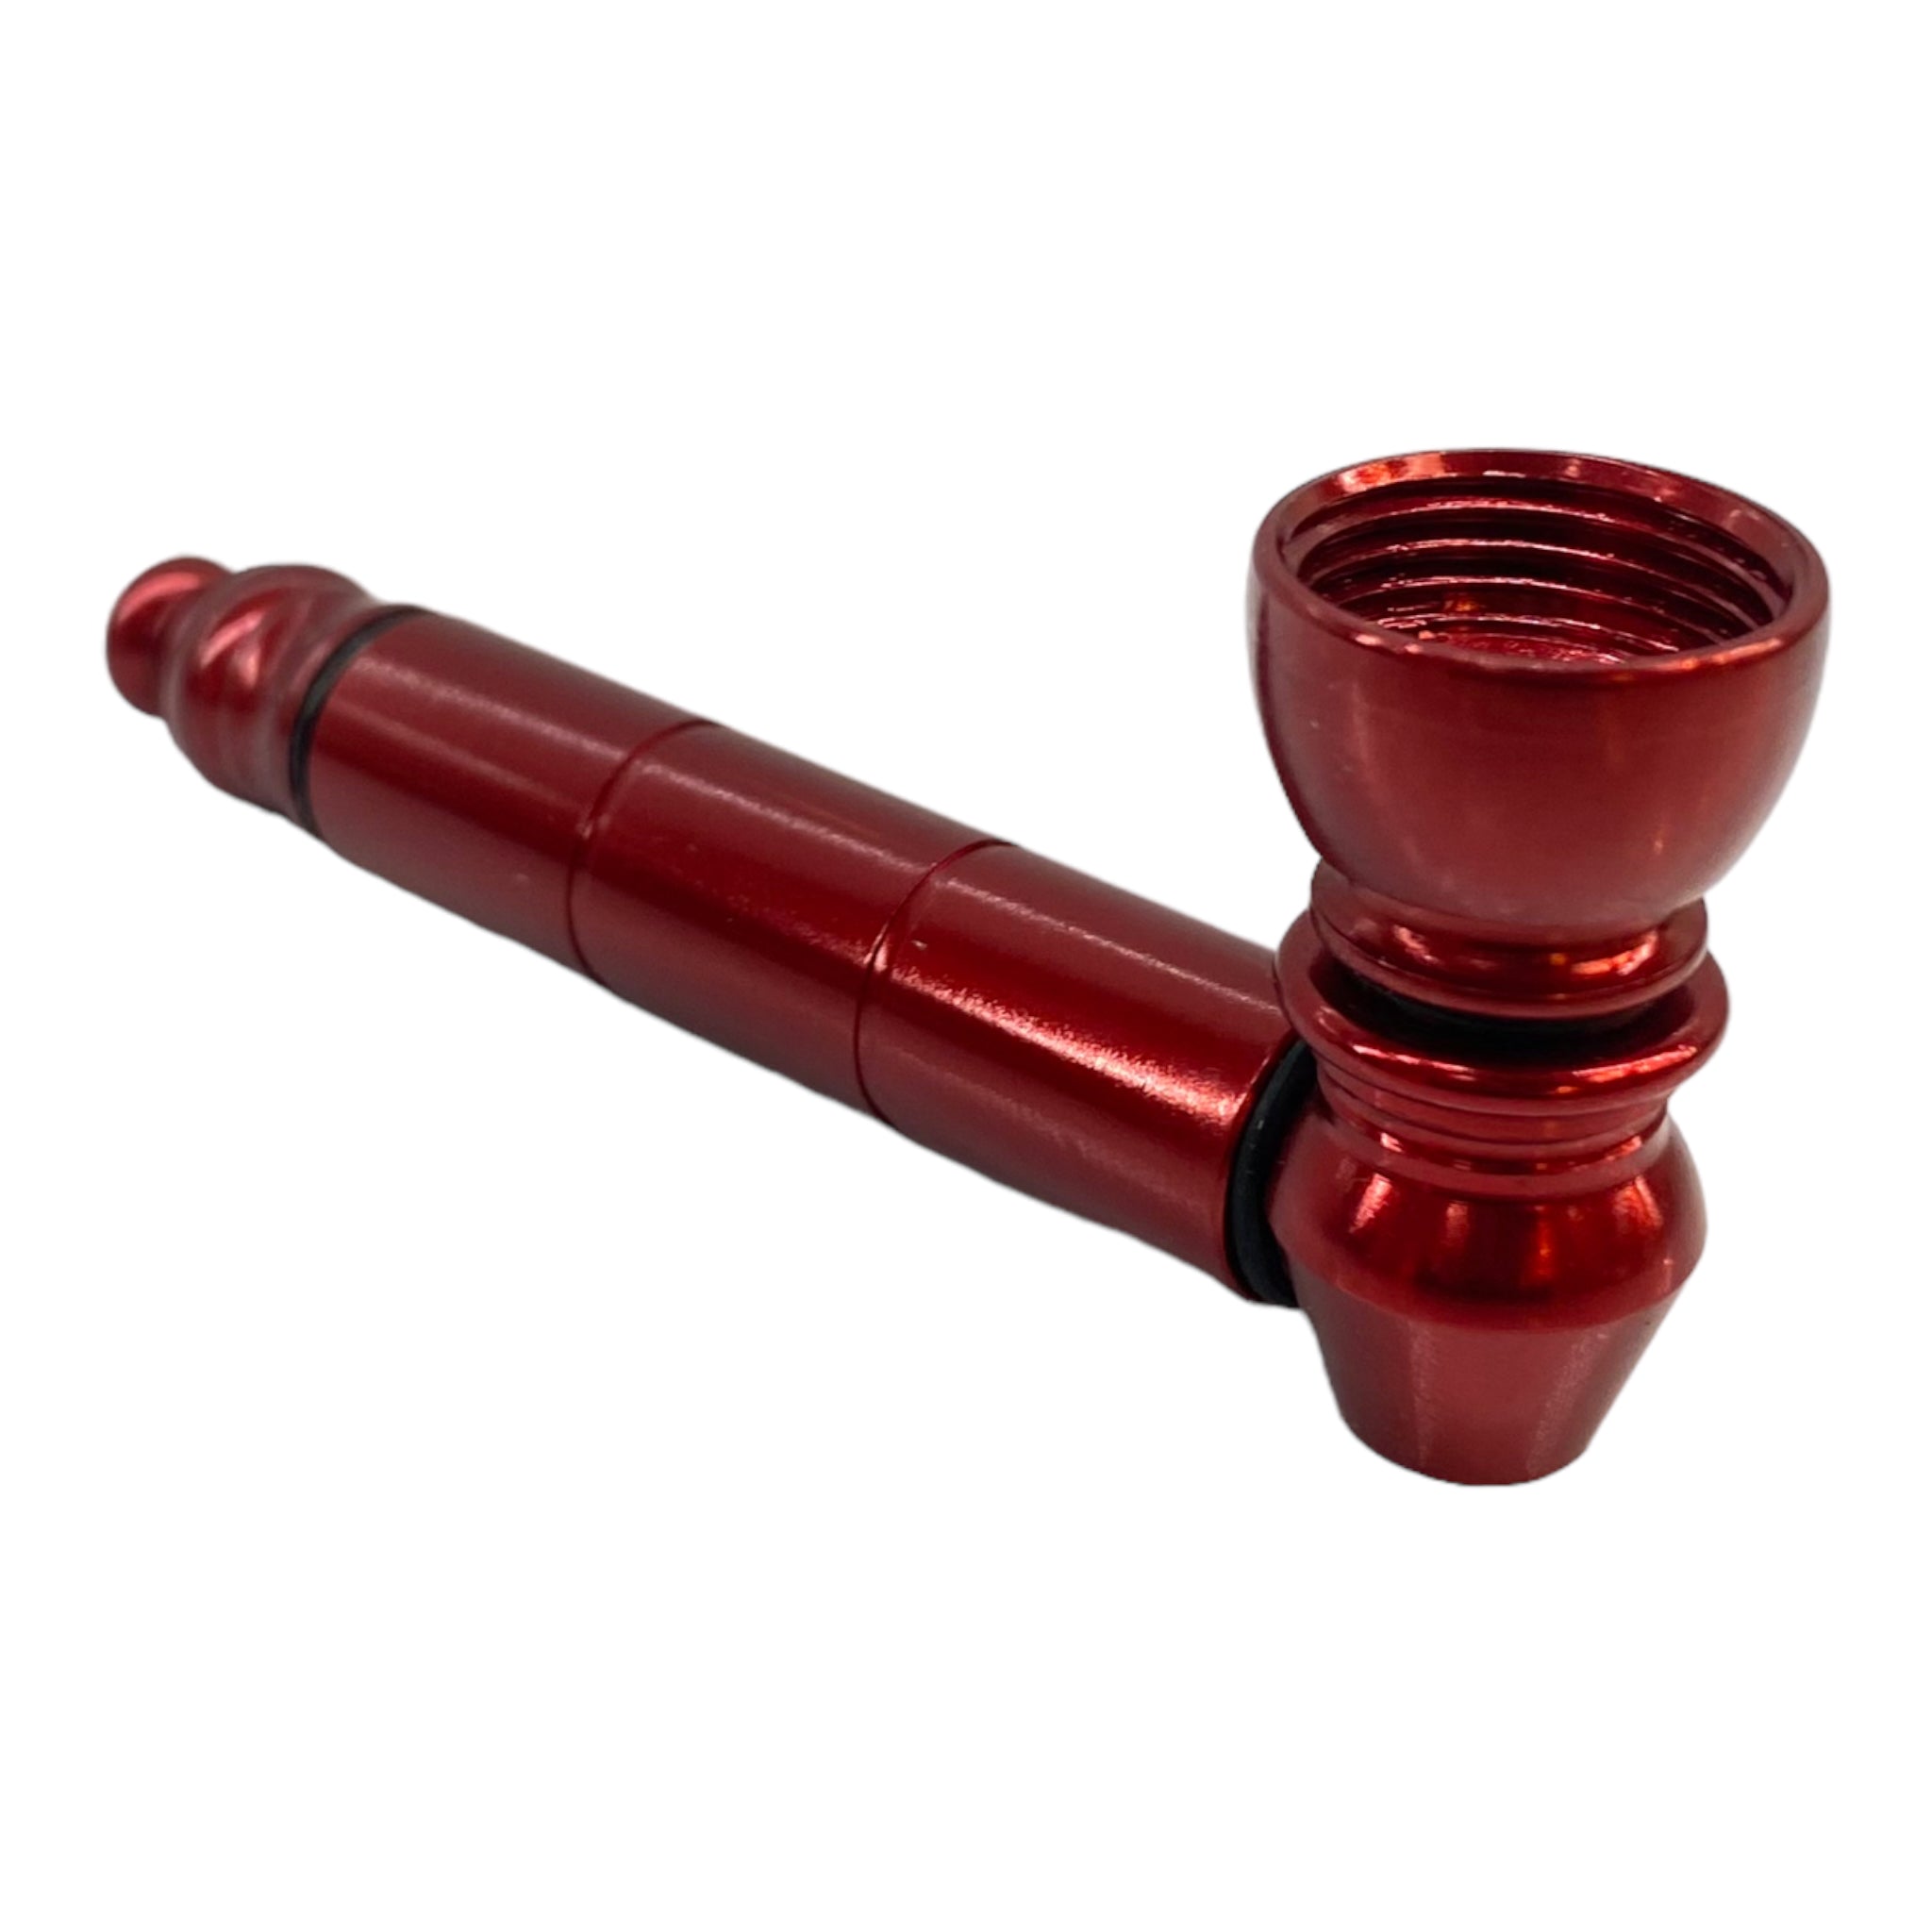 Metal weed and tobbaco pipe red basic metal pipe with small chamber for sale free shipping